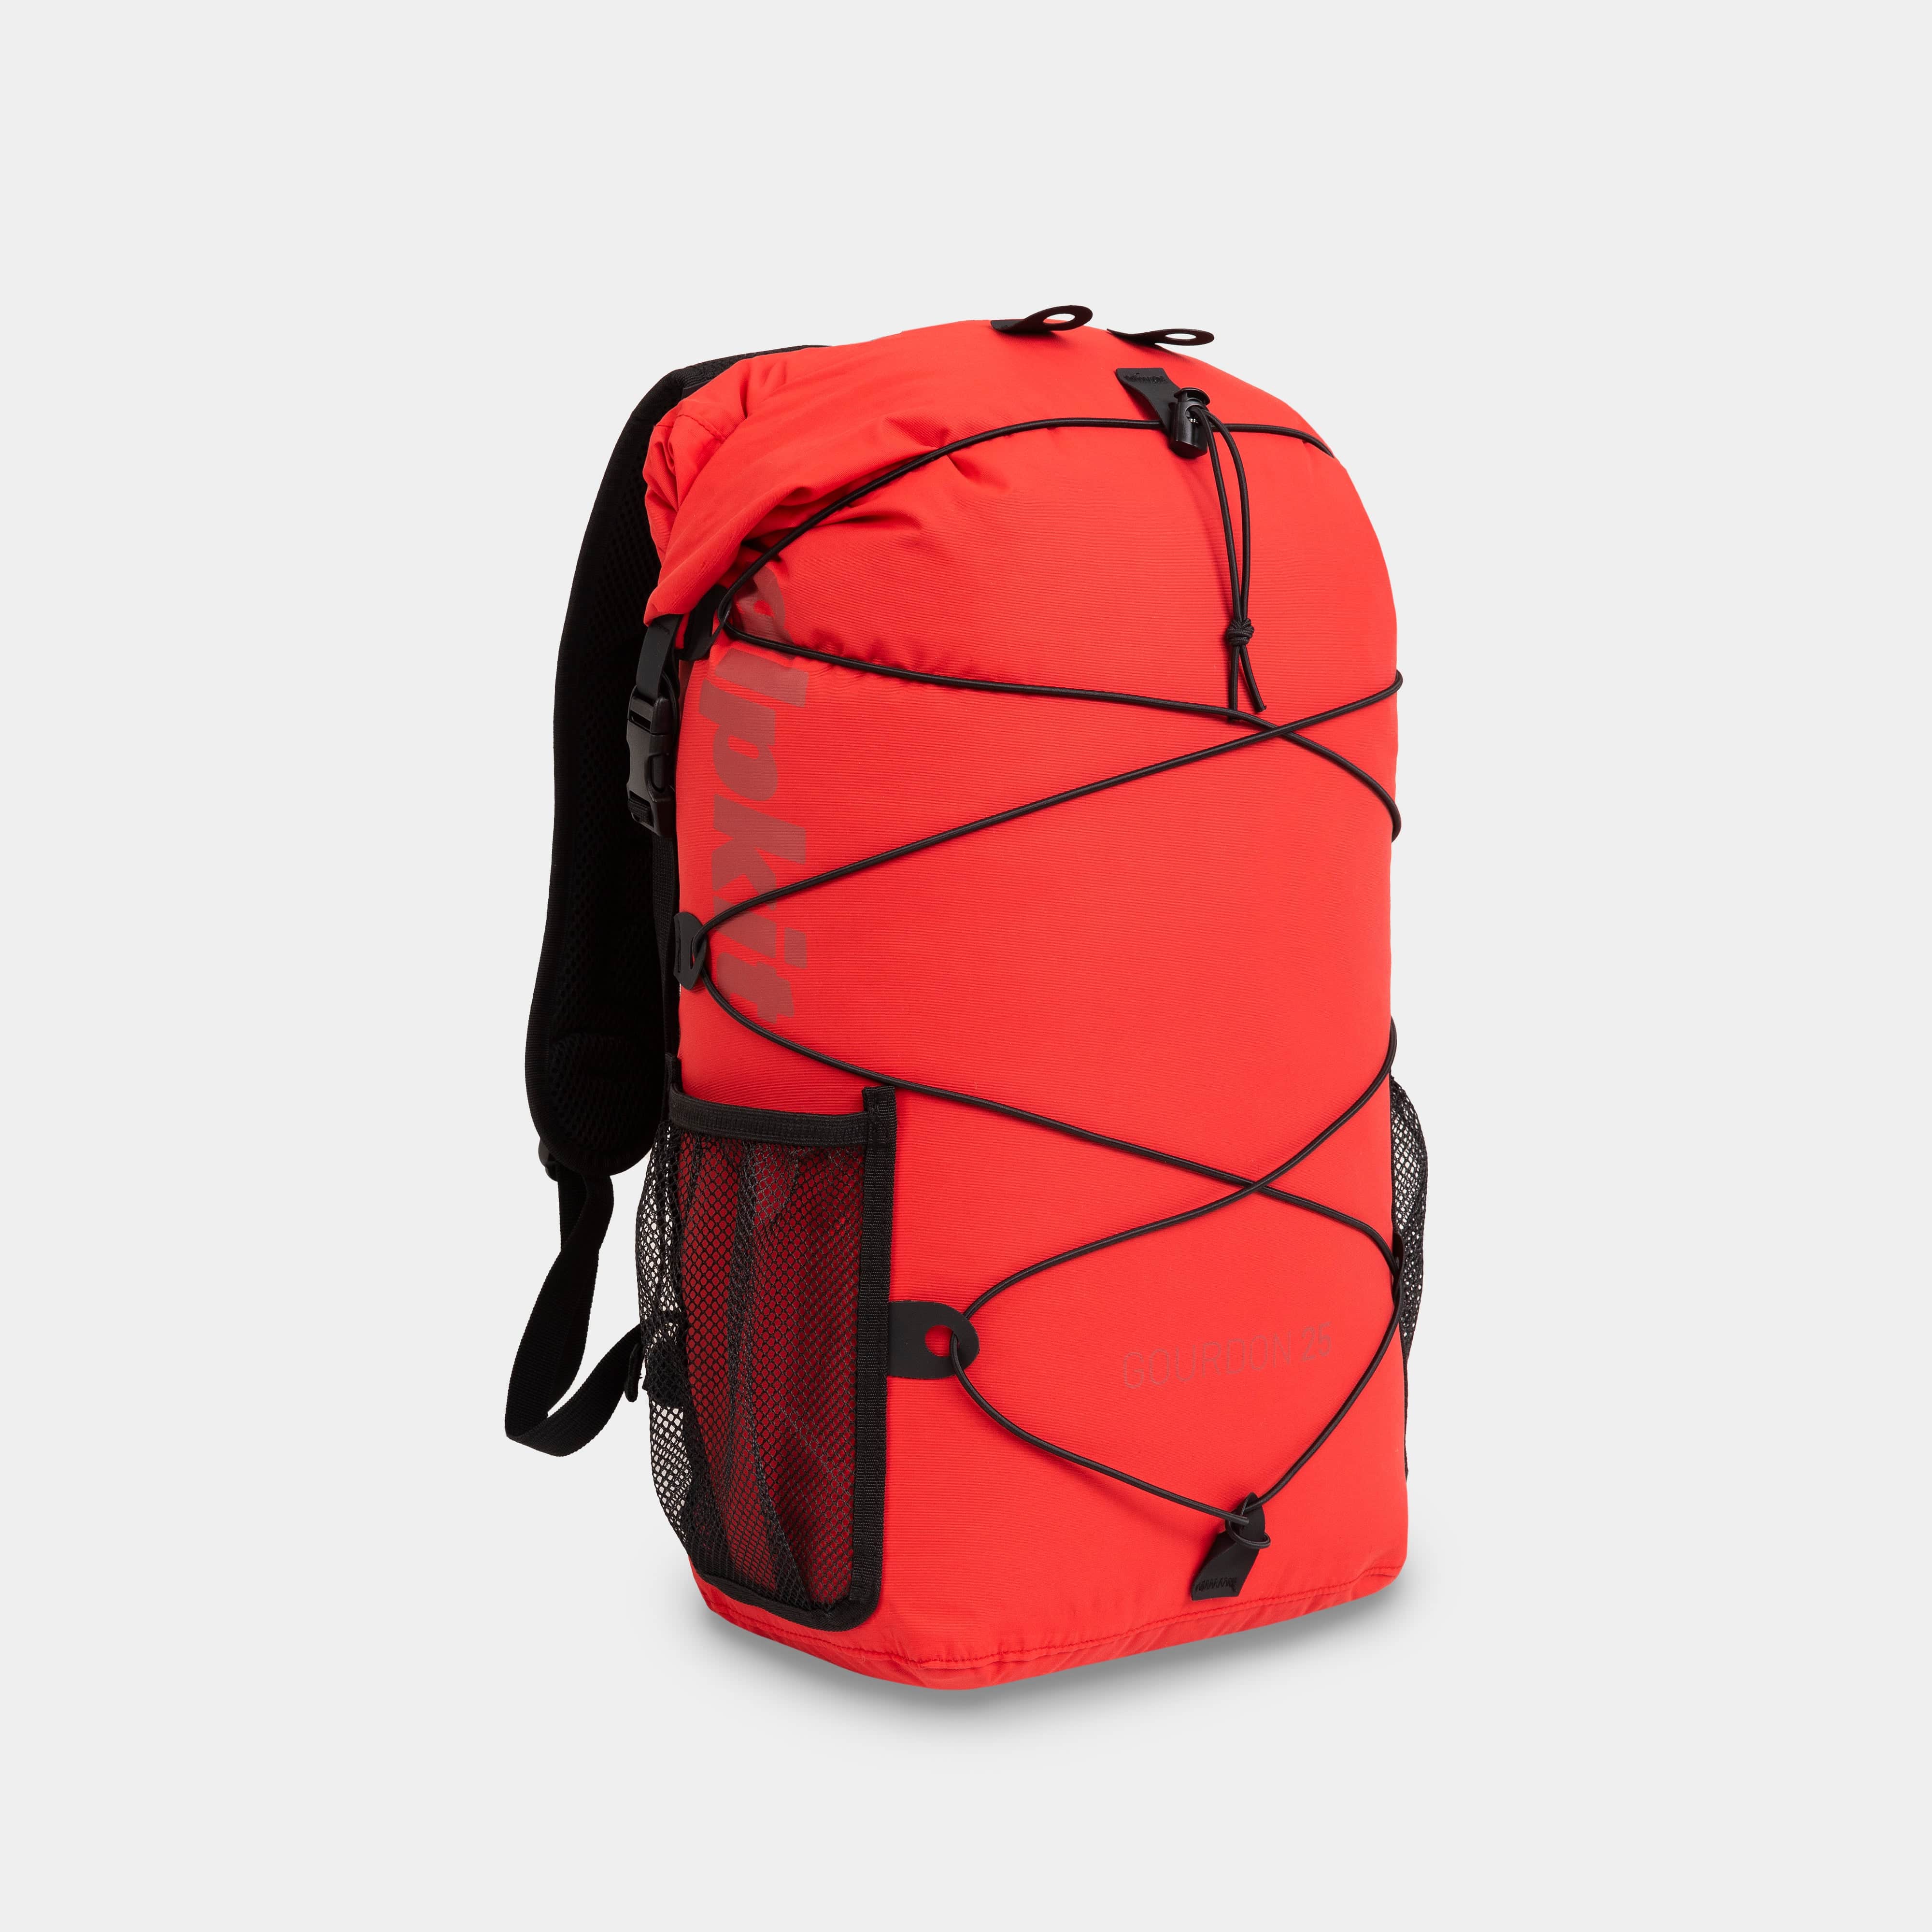 alpkit Gourdon 25 dry bag backpack in chilli red